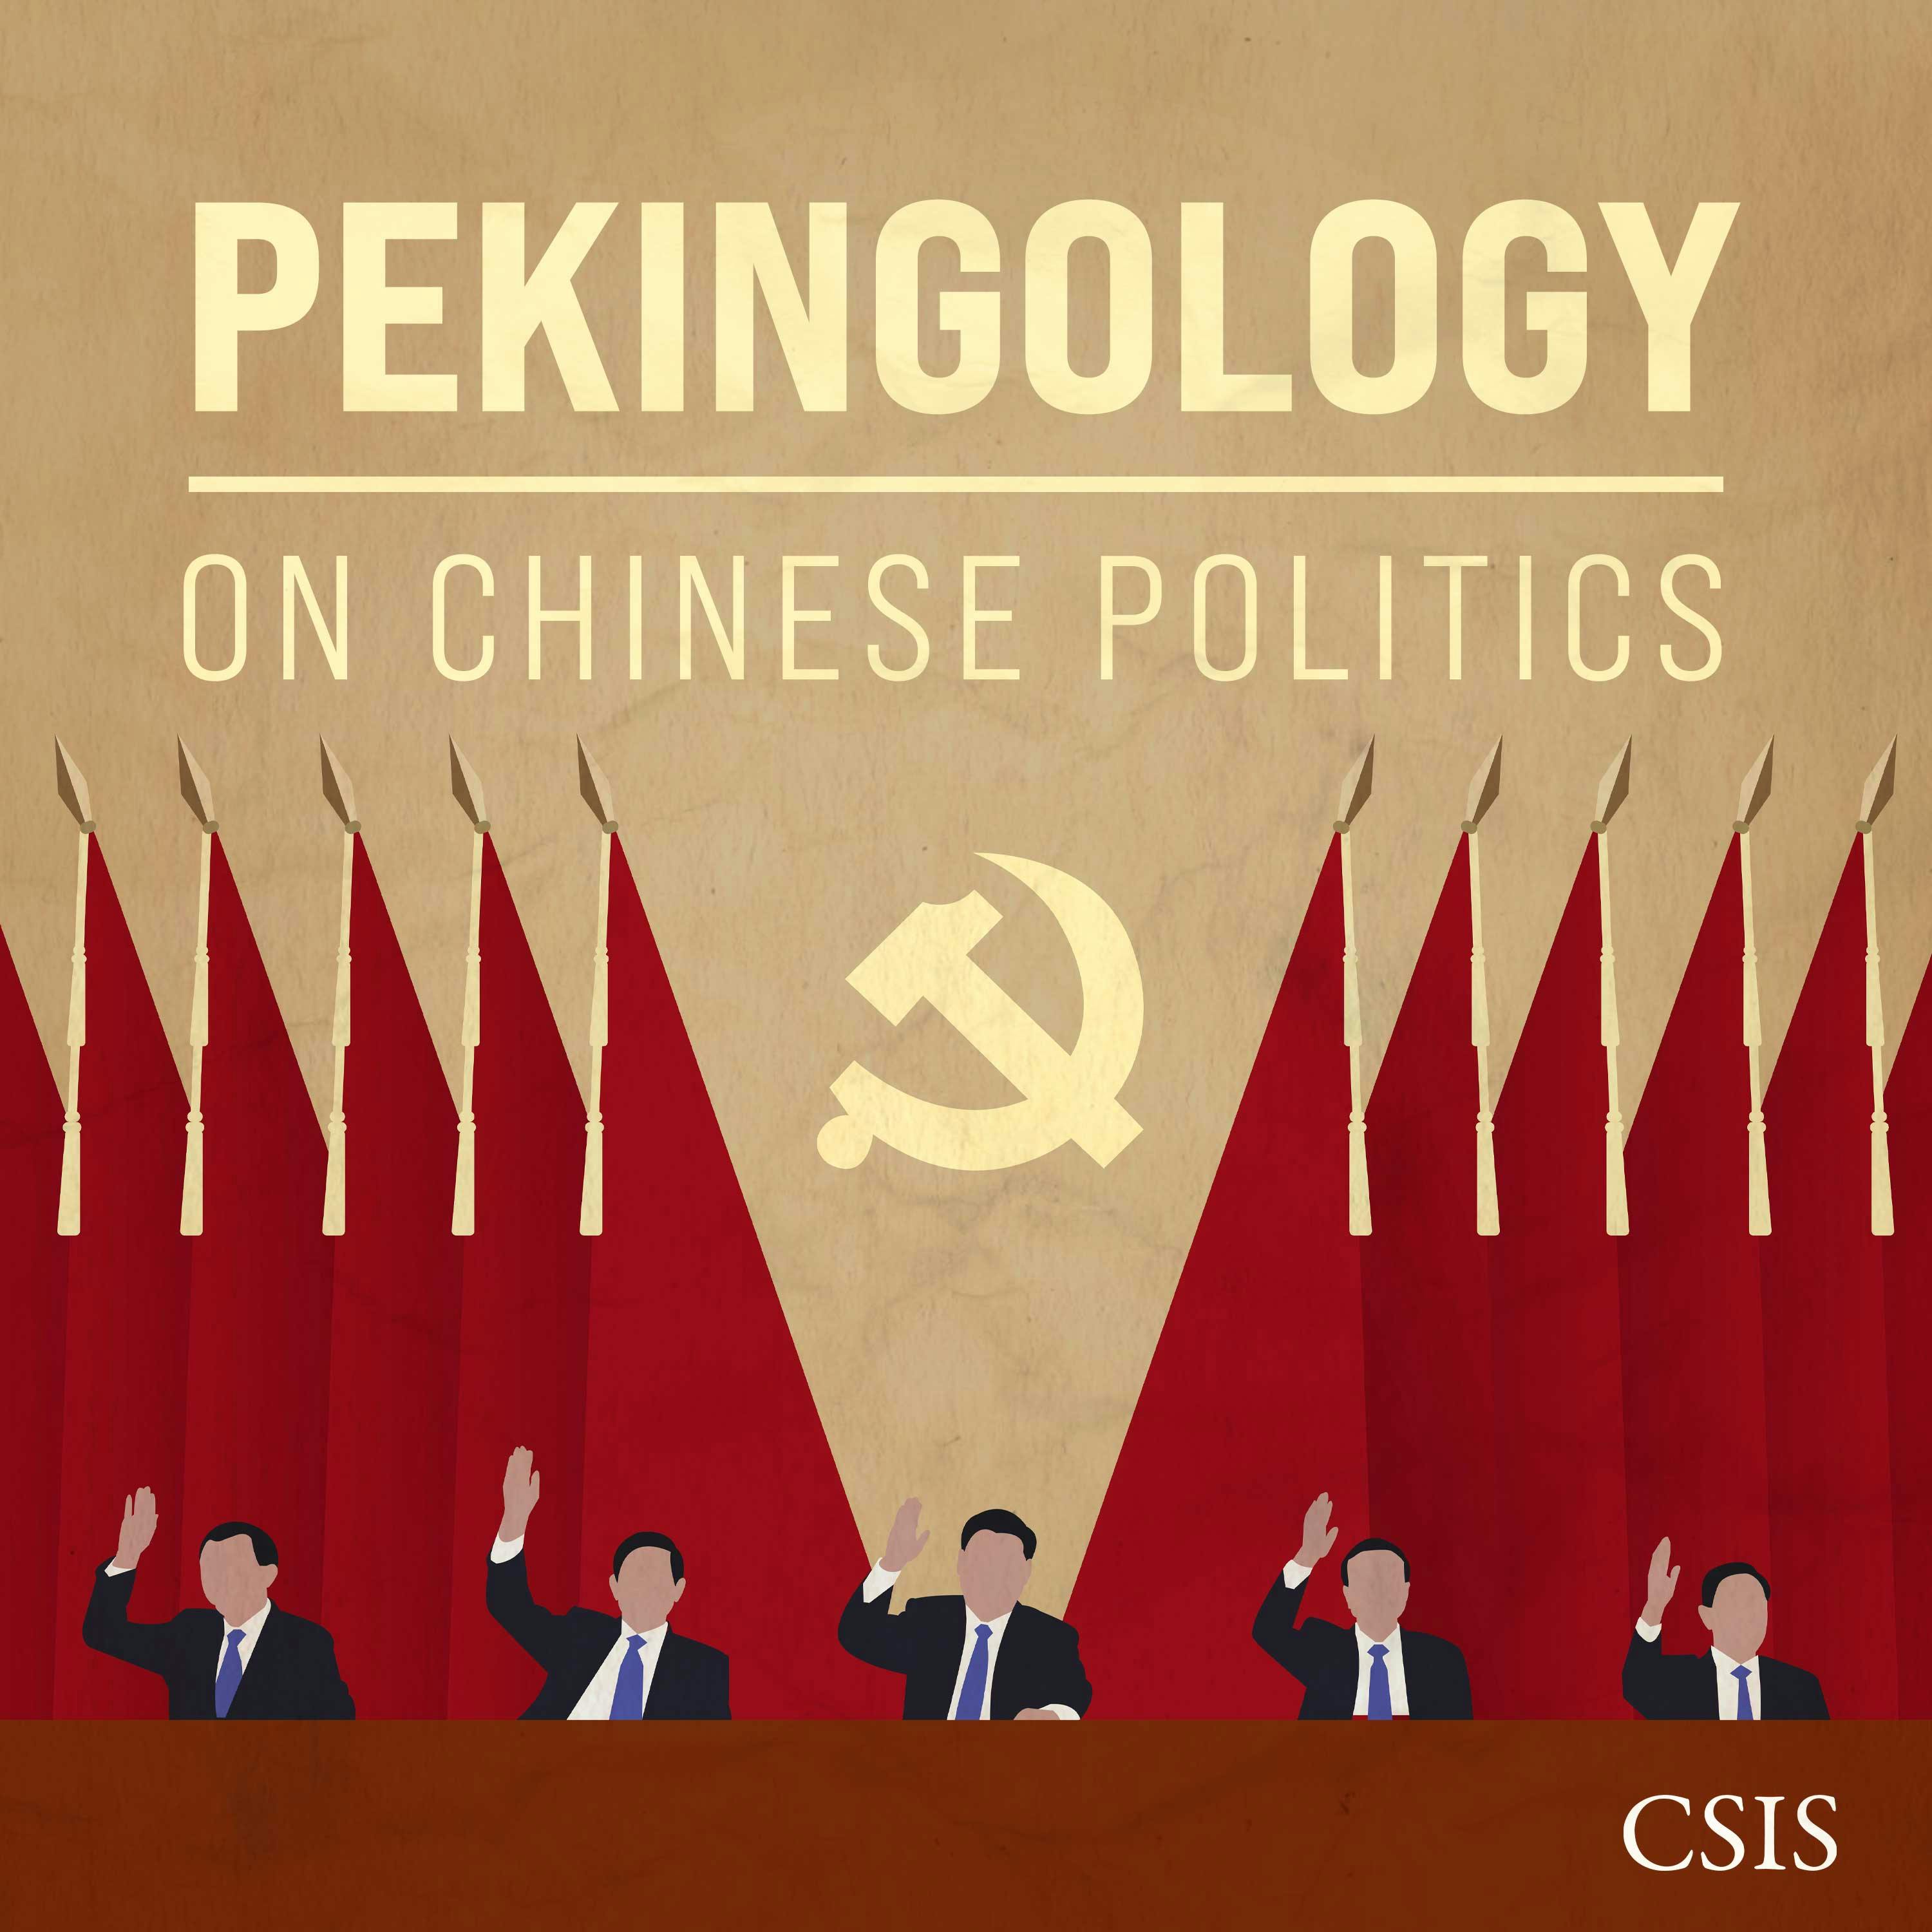 Ideology and Law in Xi Jinping’s China